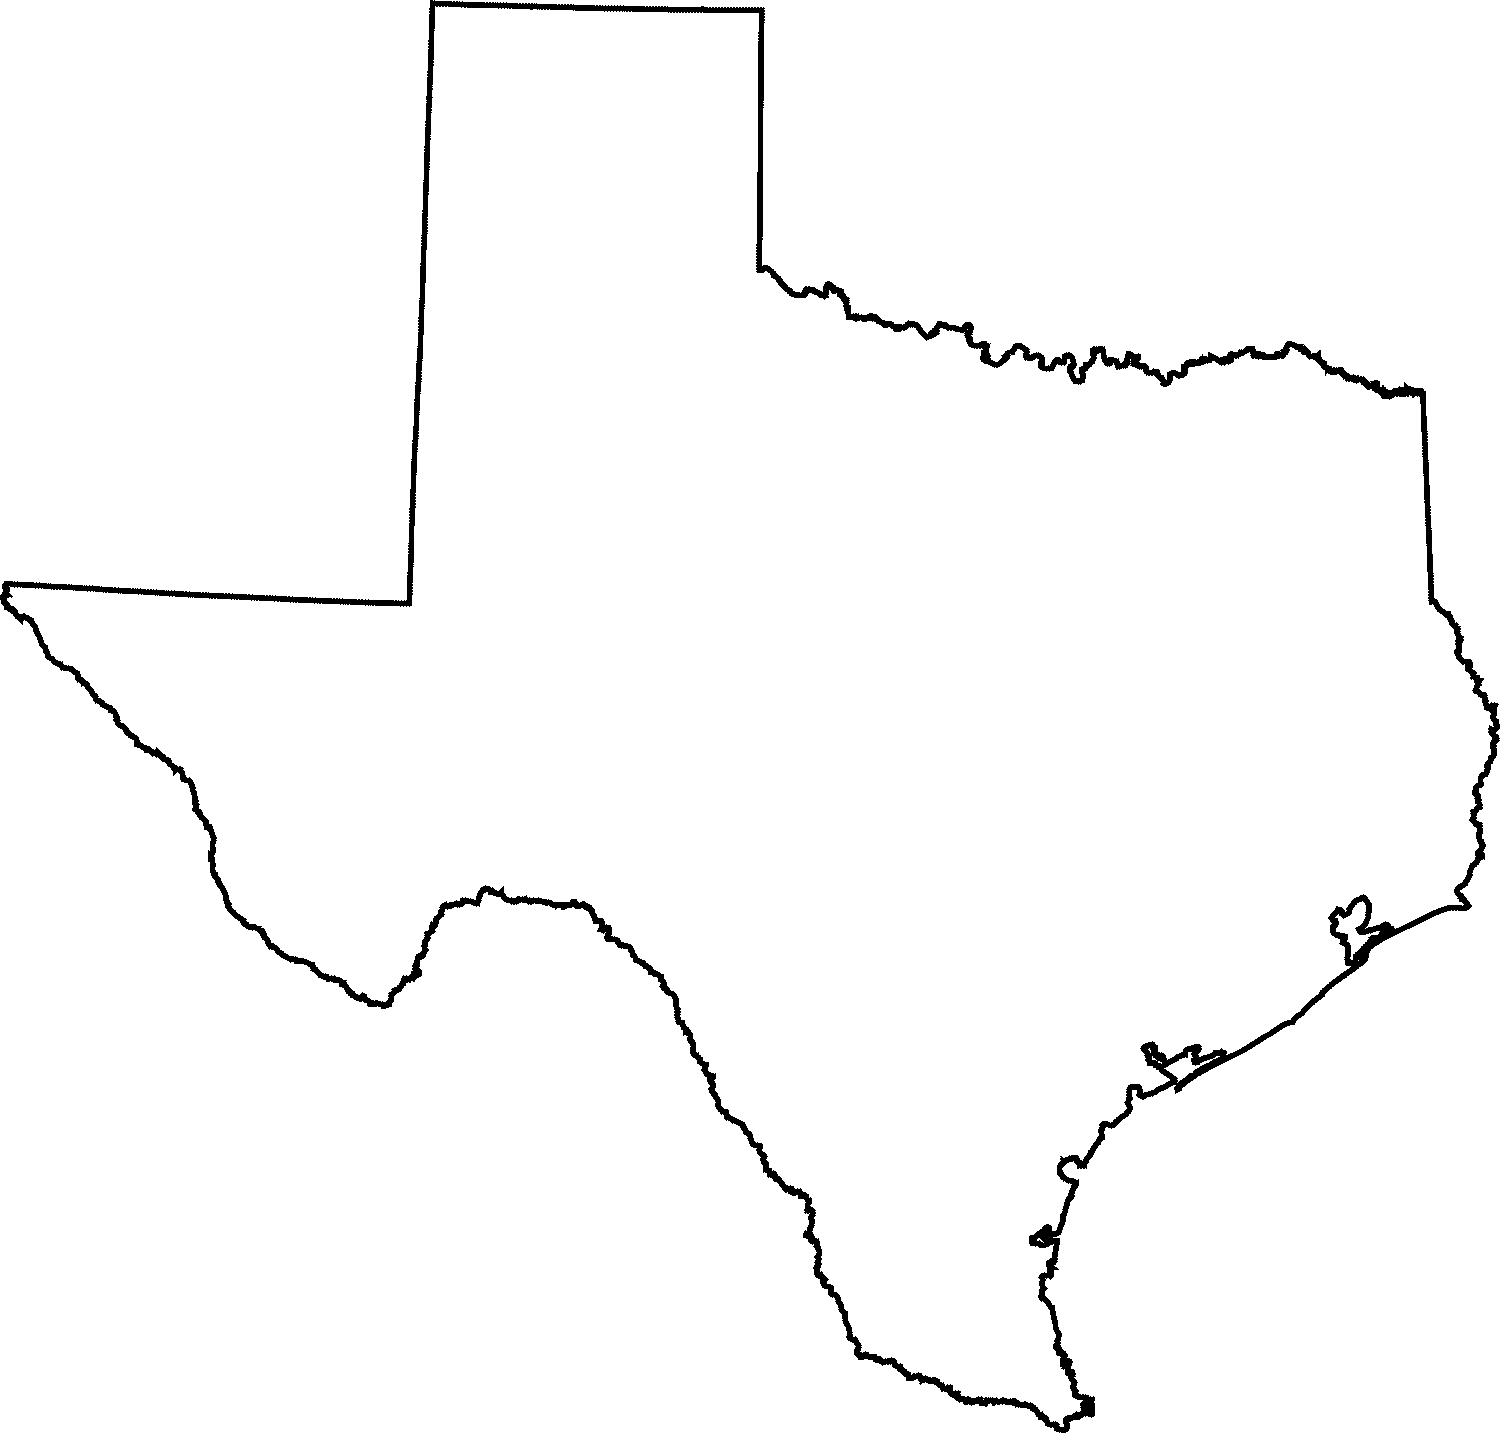 Pix For > Texas State Outline Orange ClipArt Best ClipArt Best